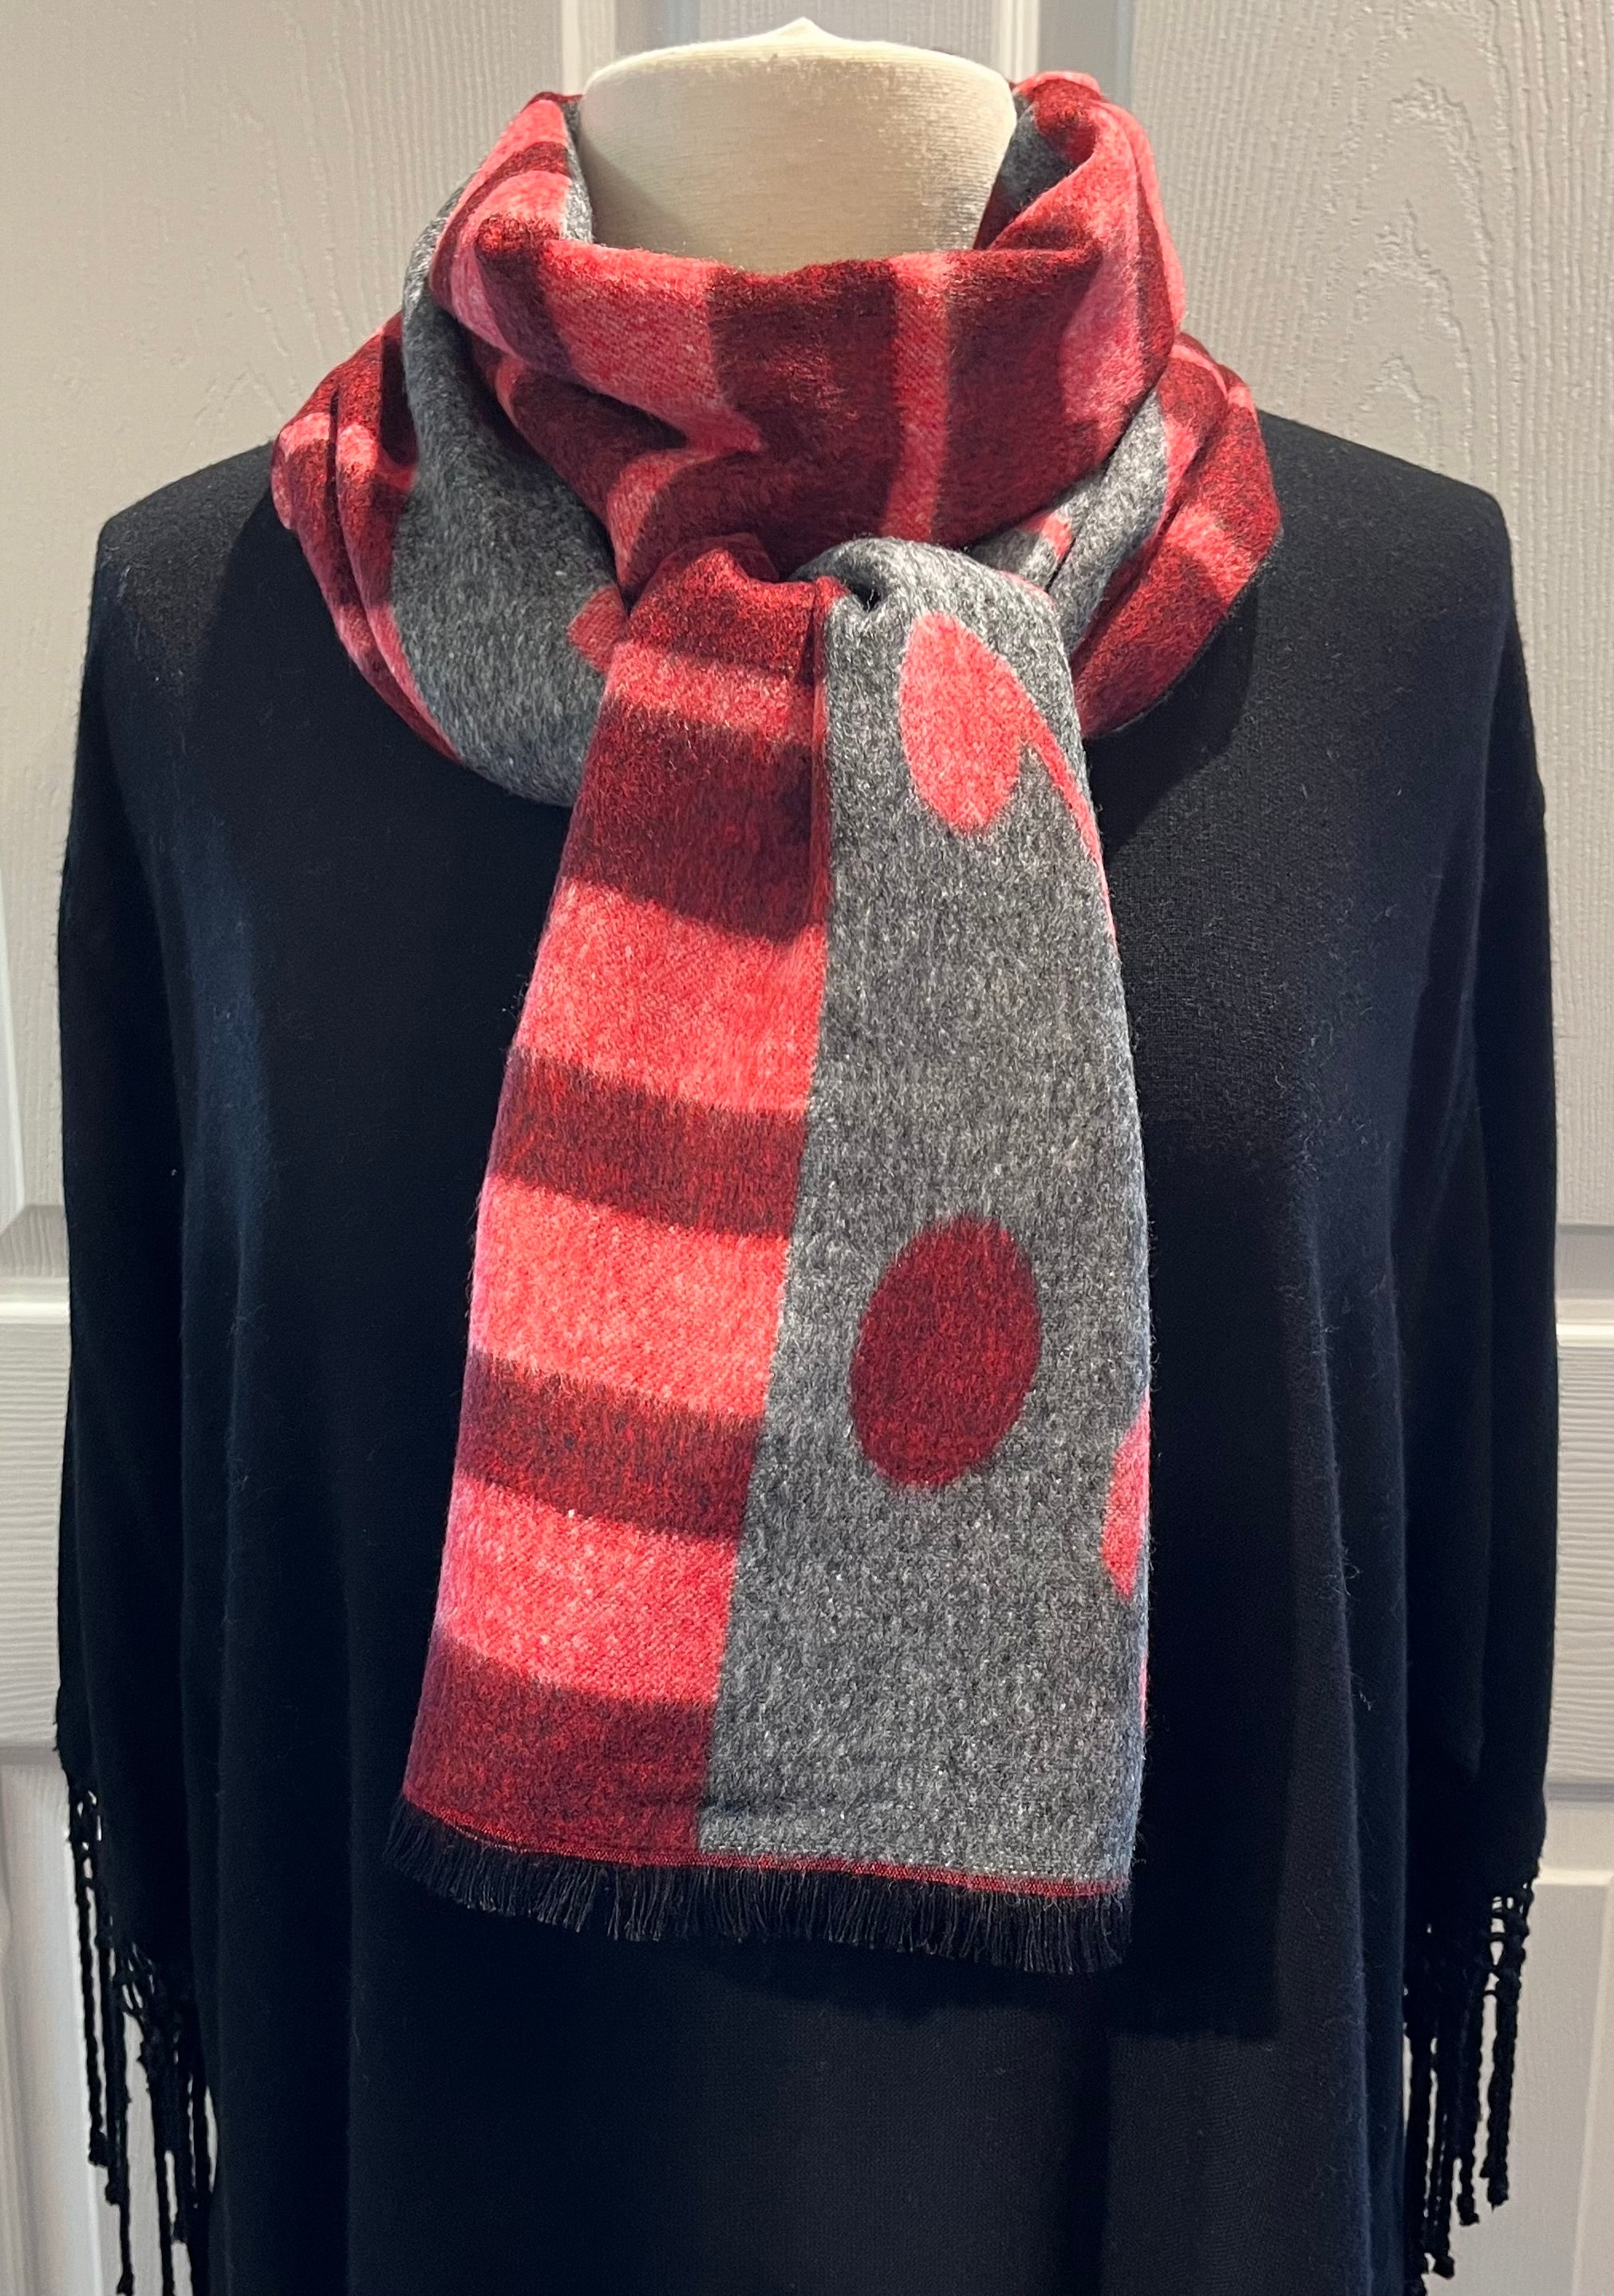 Piano/Musical Notes Cashmere Scarf